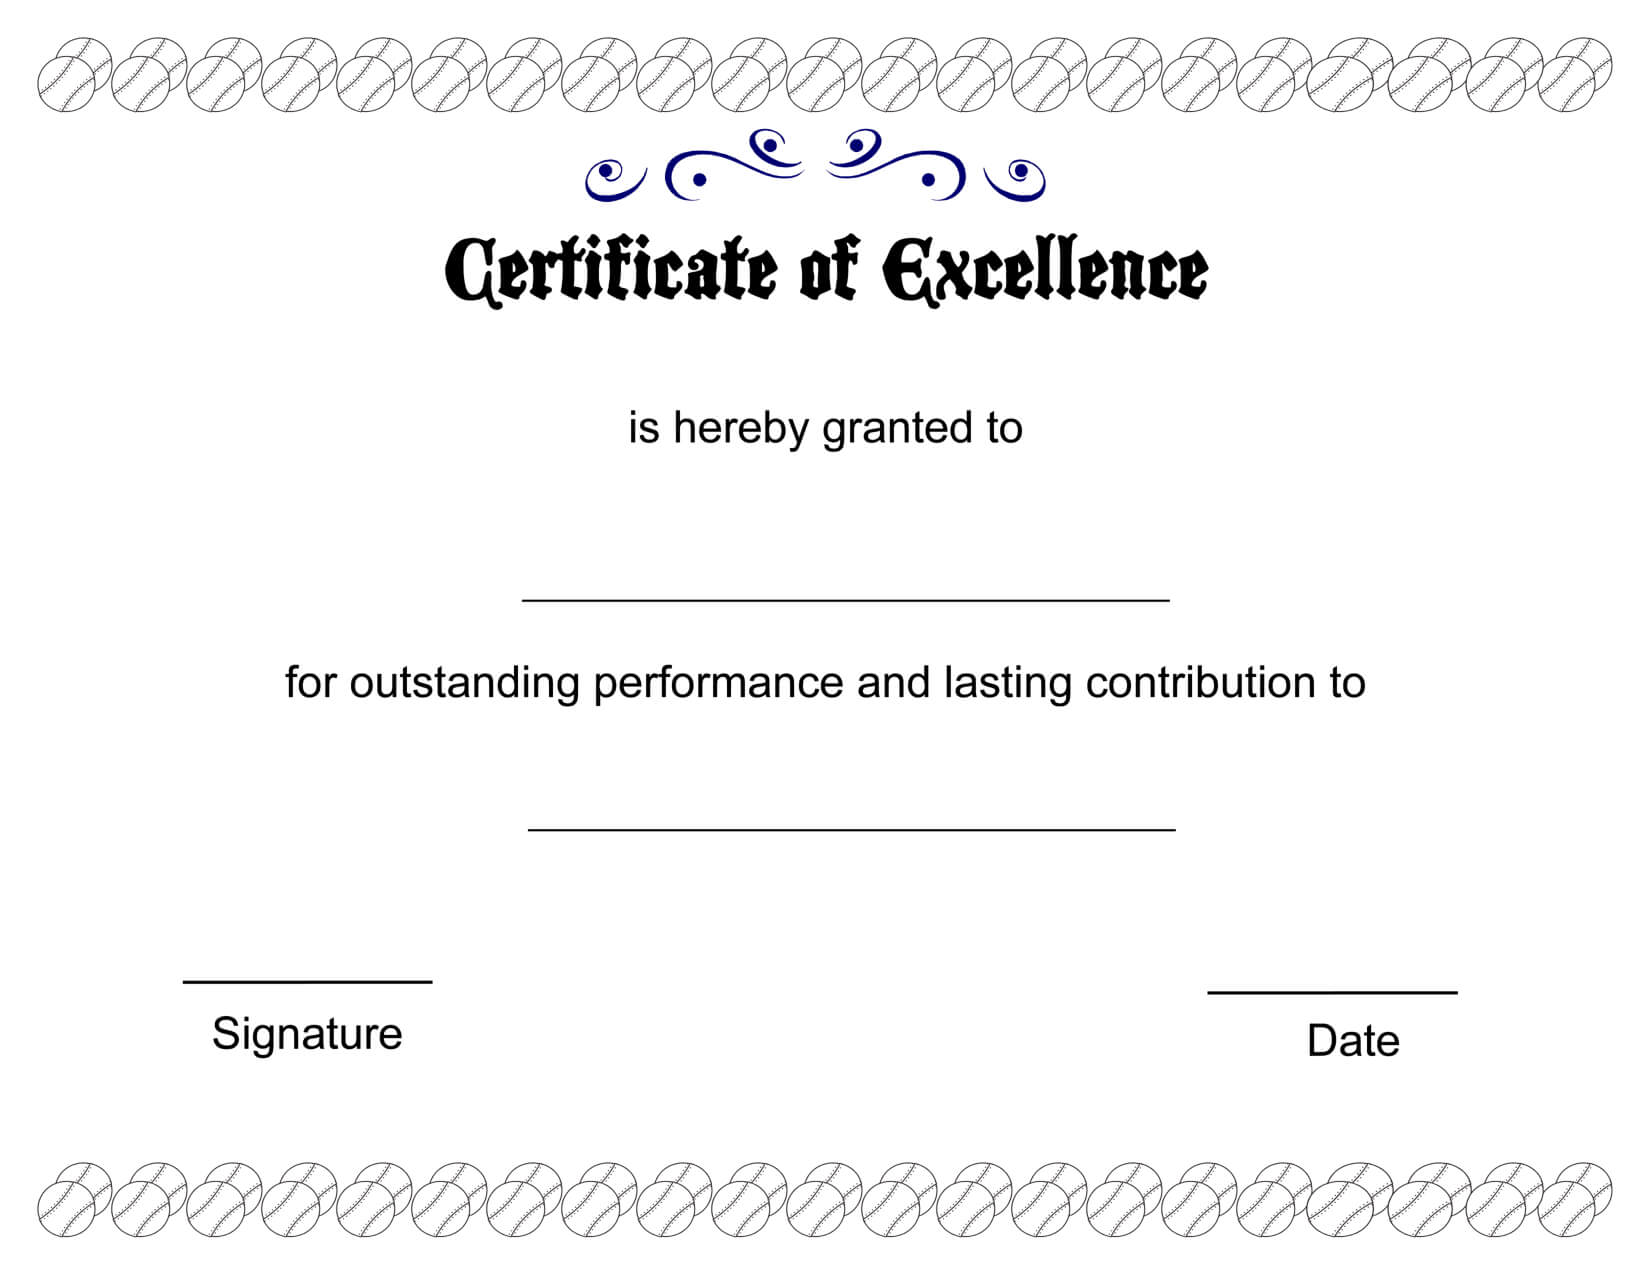 Excellent Certificate Of Excellence Template Designed Intended For Award Of Excellence Certificate Template